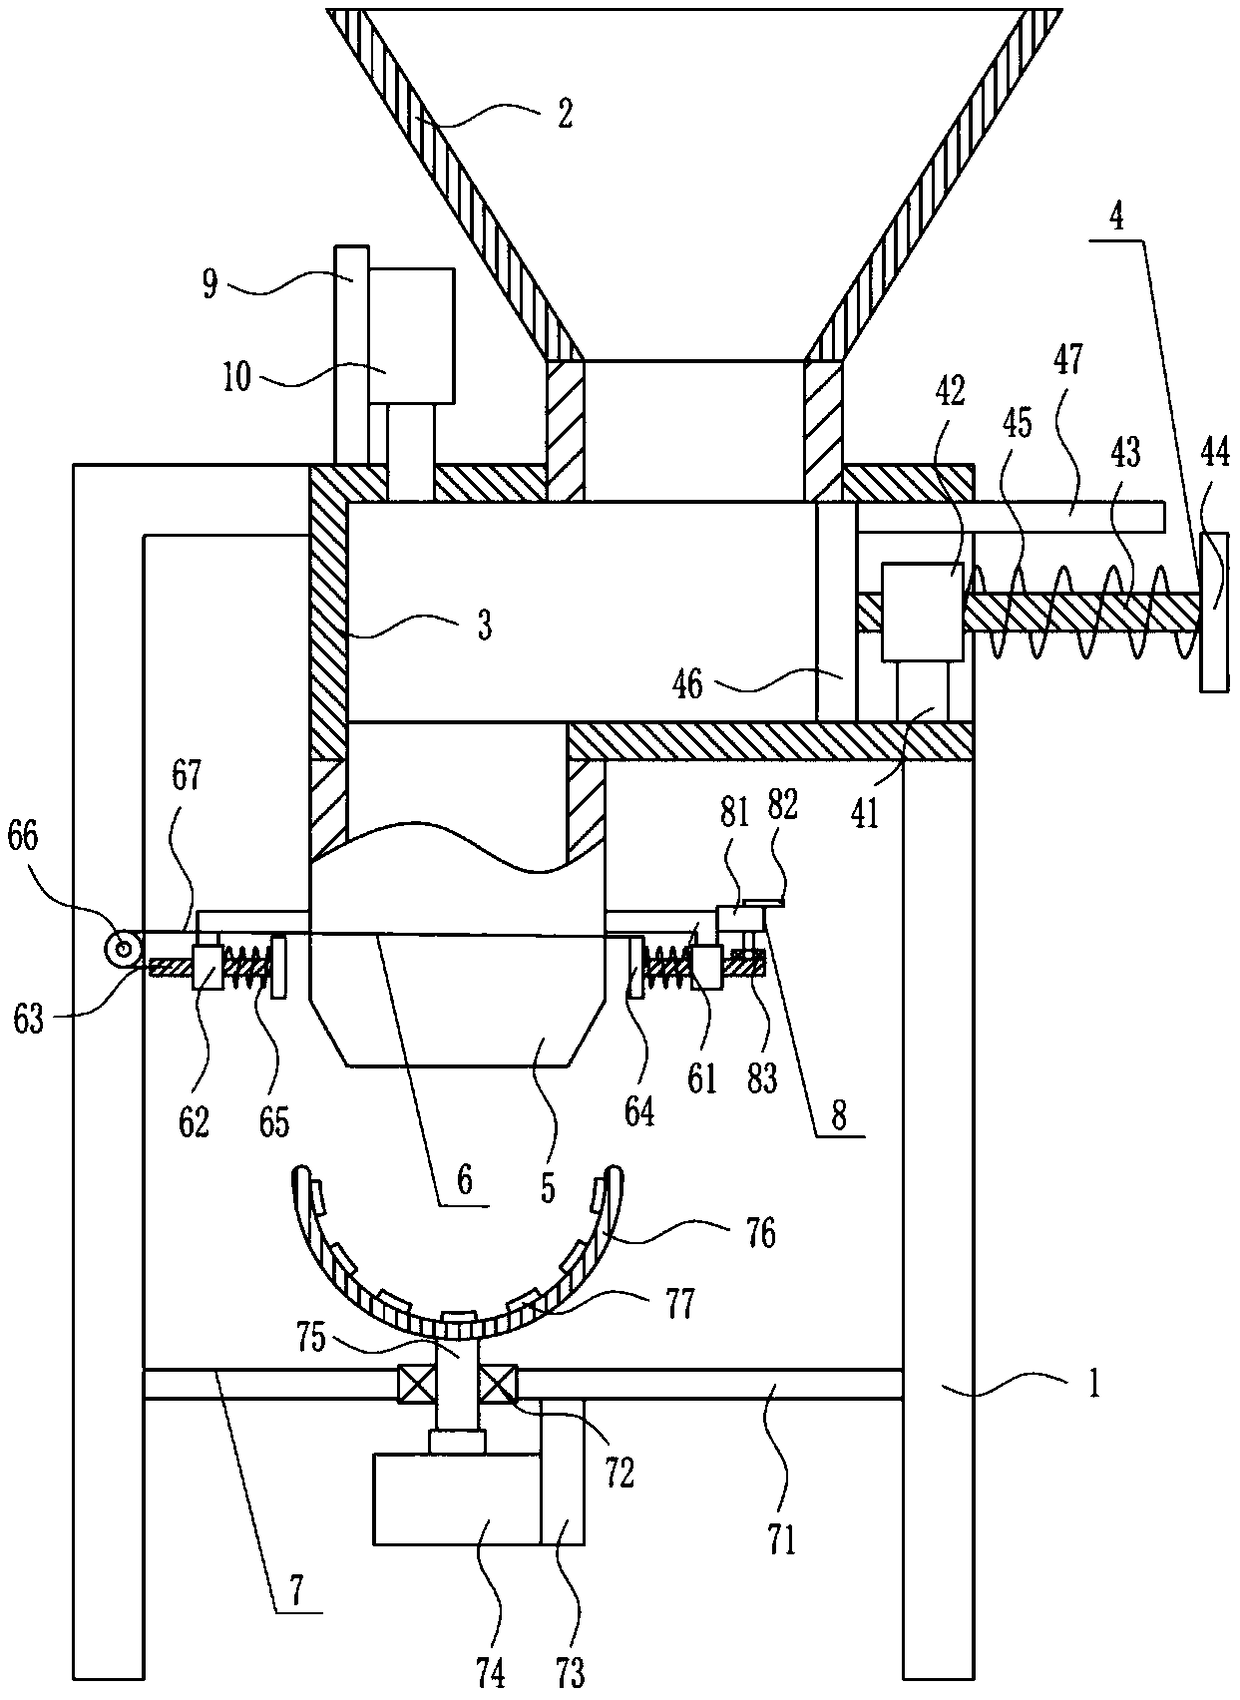 Navel orange bagging auxiliary device for fruit deep processing